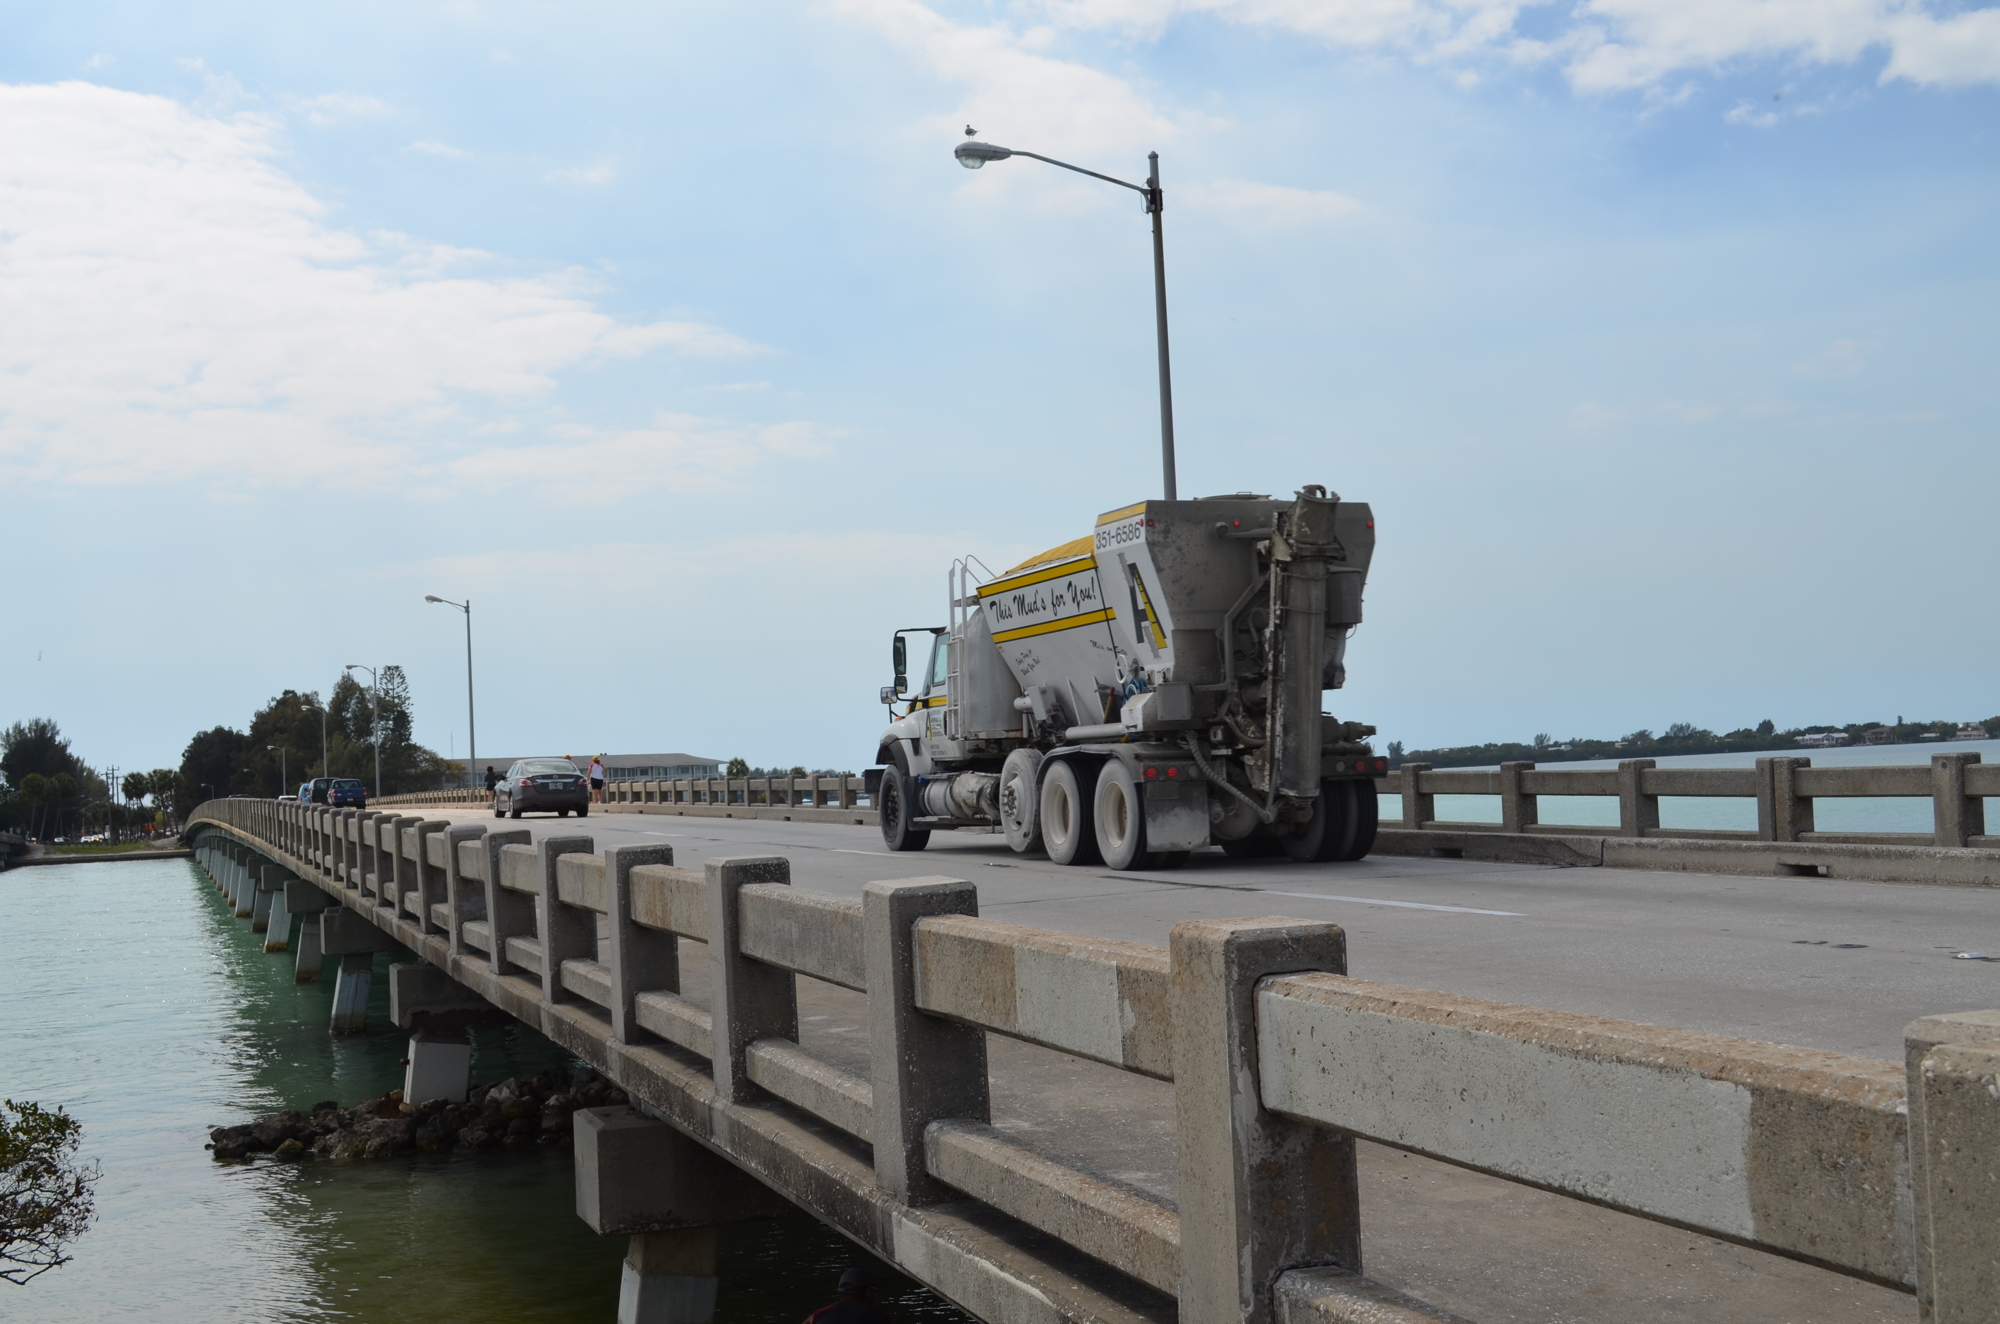 Projects ready for construction, including the replacement of the Coon Key Bridge, are at the top of the city's priority list.